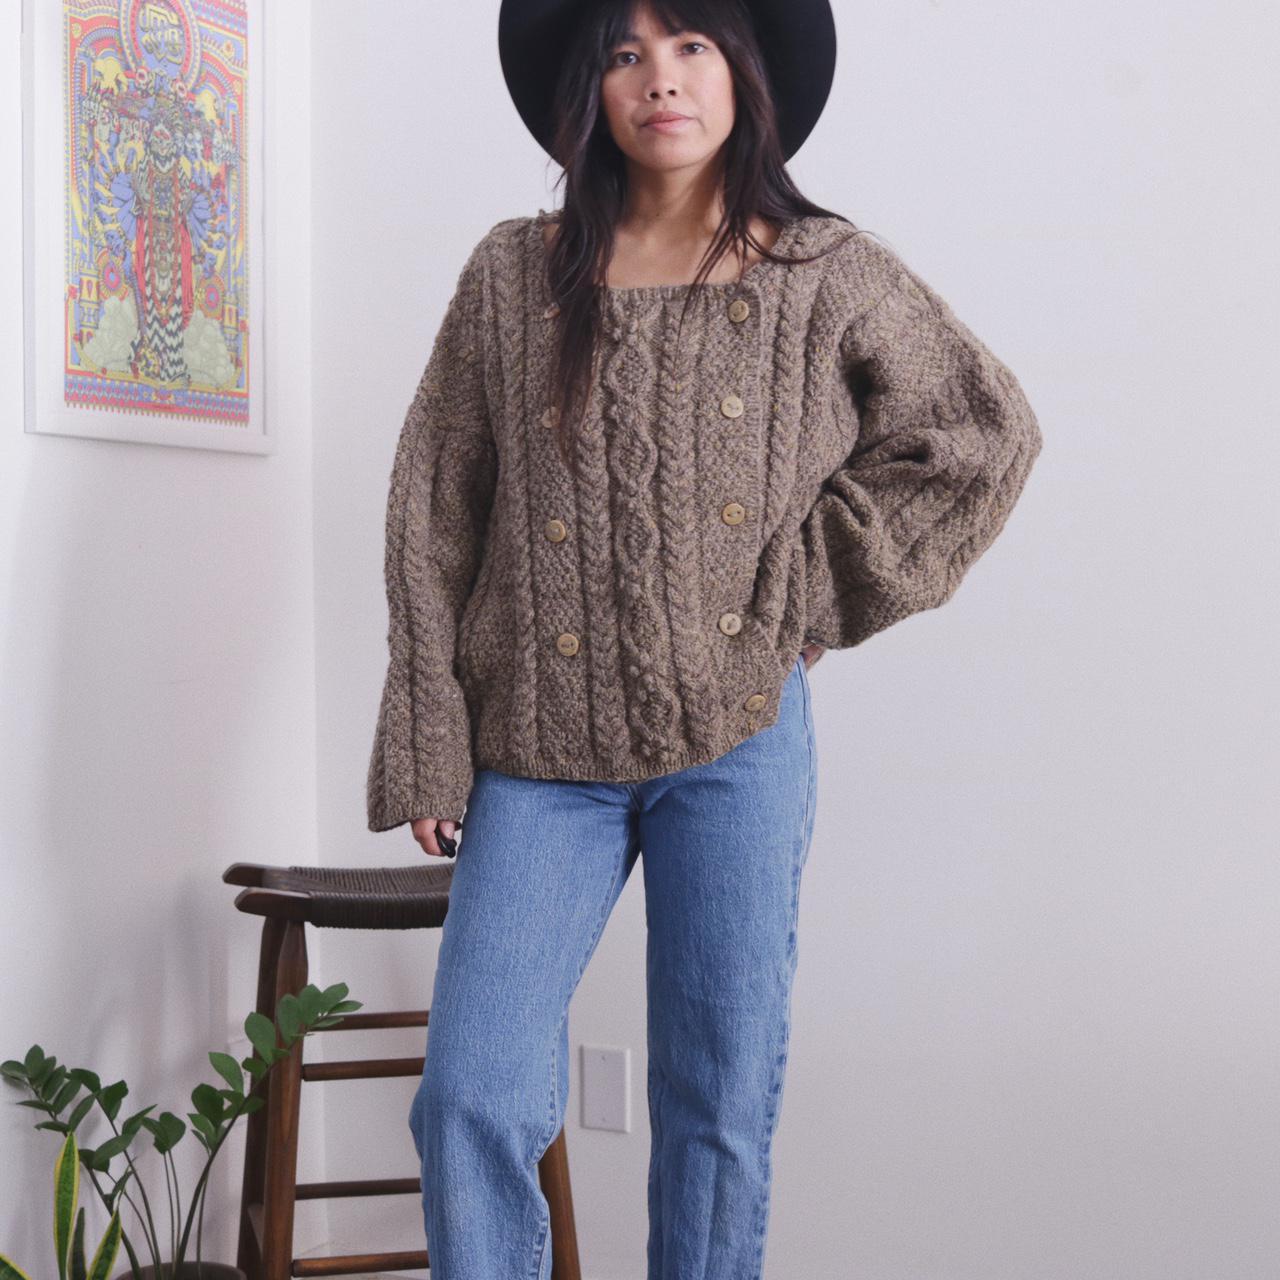 Product Image 1 - vintage 70s knit sweater

DESCRIPTION
mid to